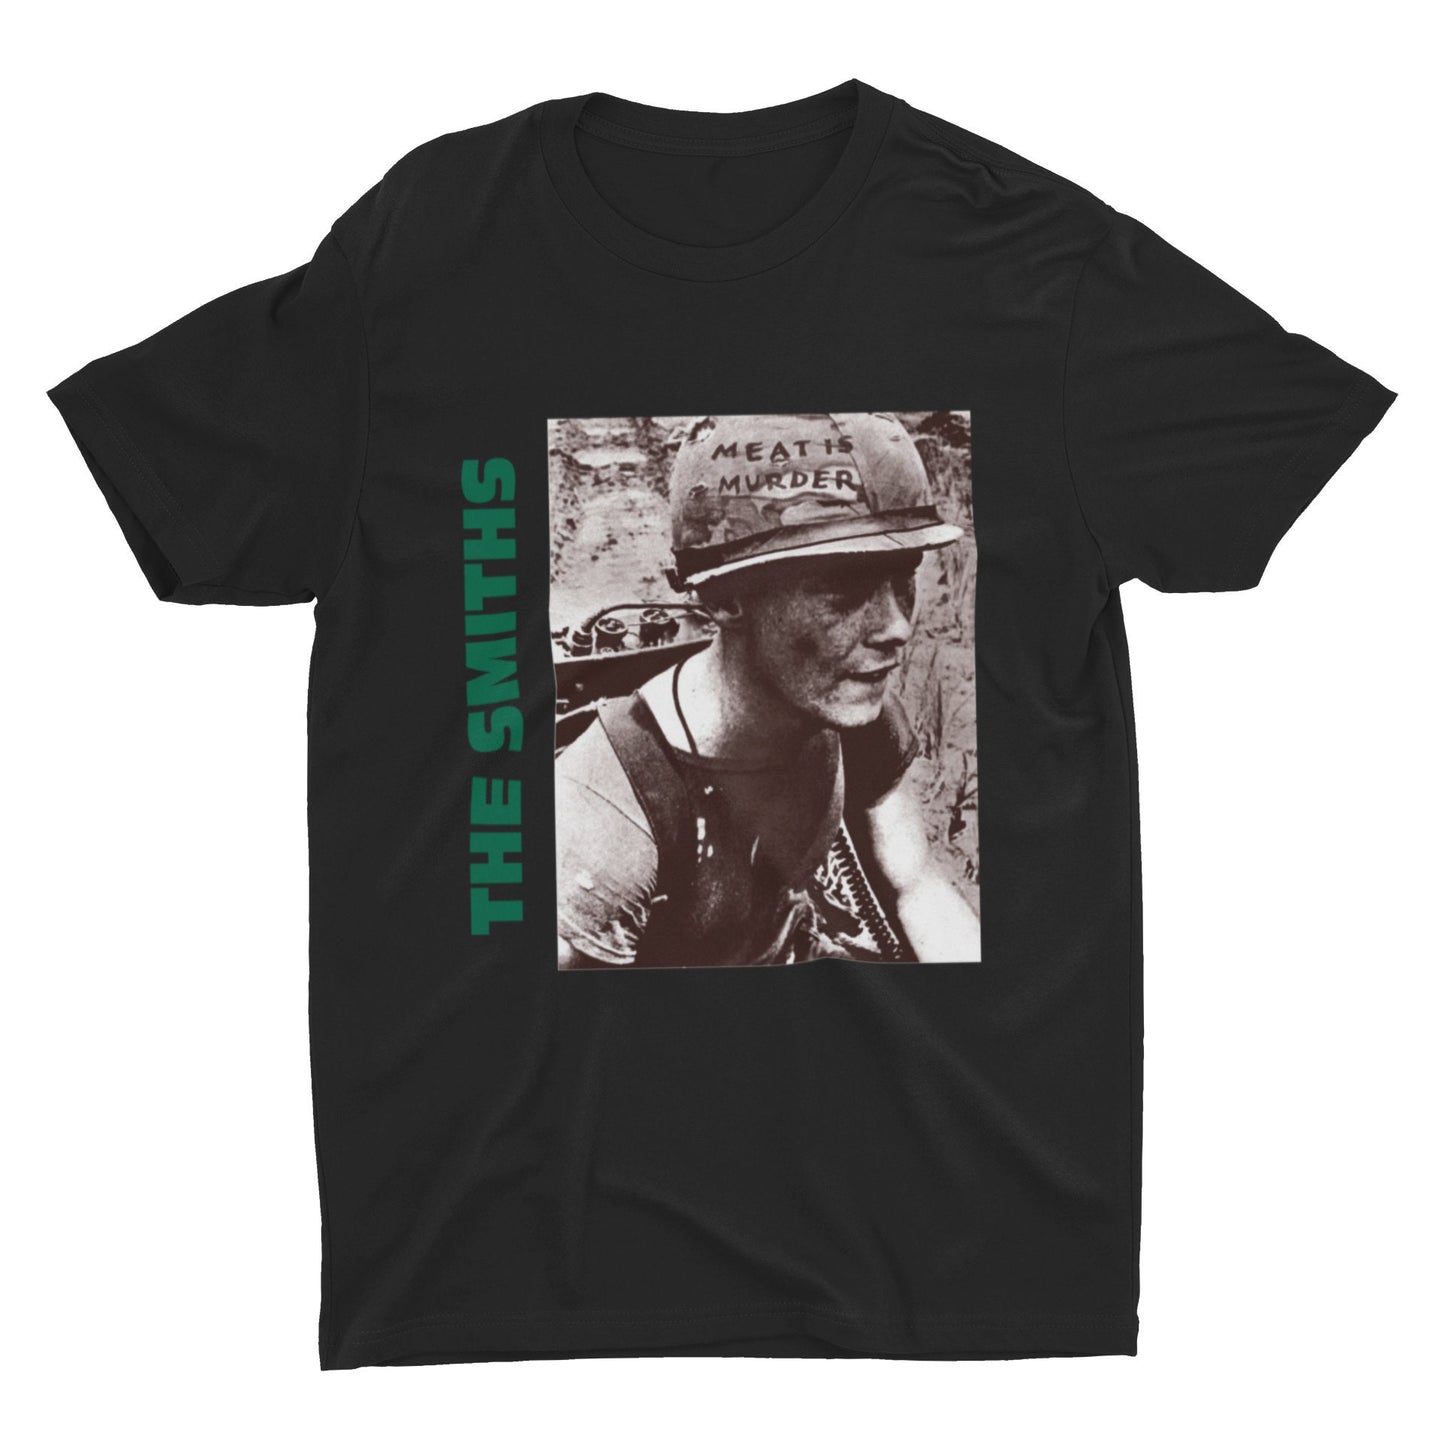 Meat Is Murder T Shirt | The Smiths T Shirt | The Smiths Gift | Rock and Roll | Morrissey T Shirt